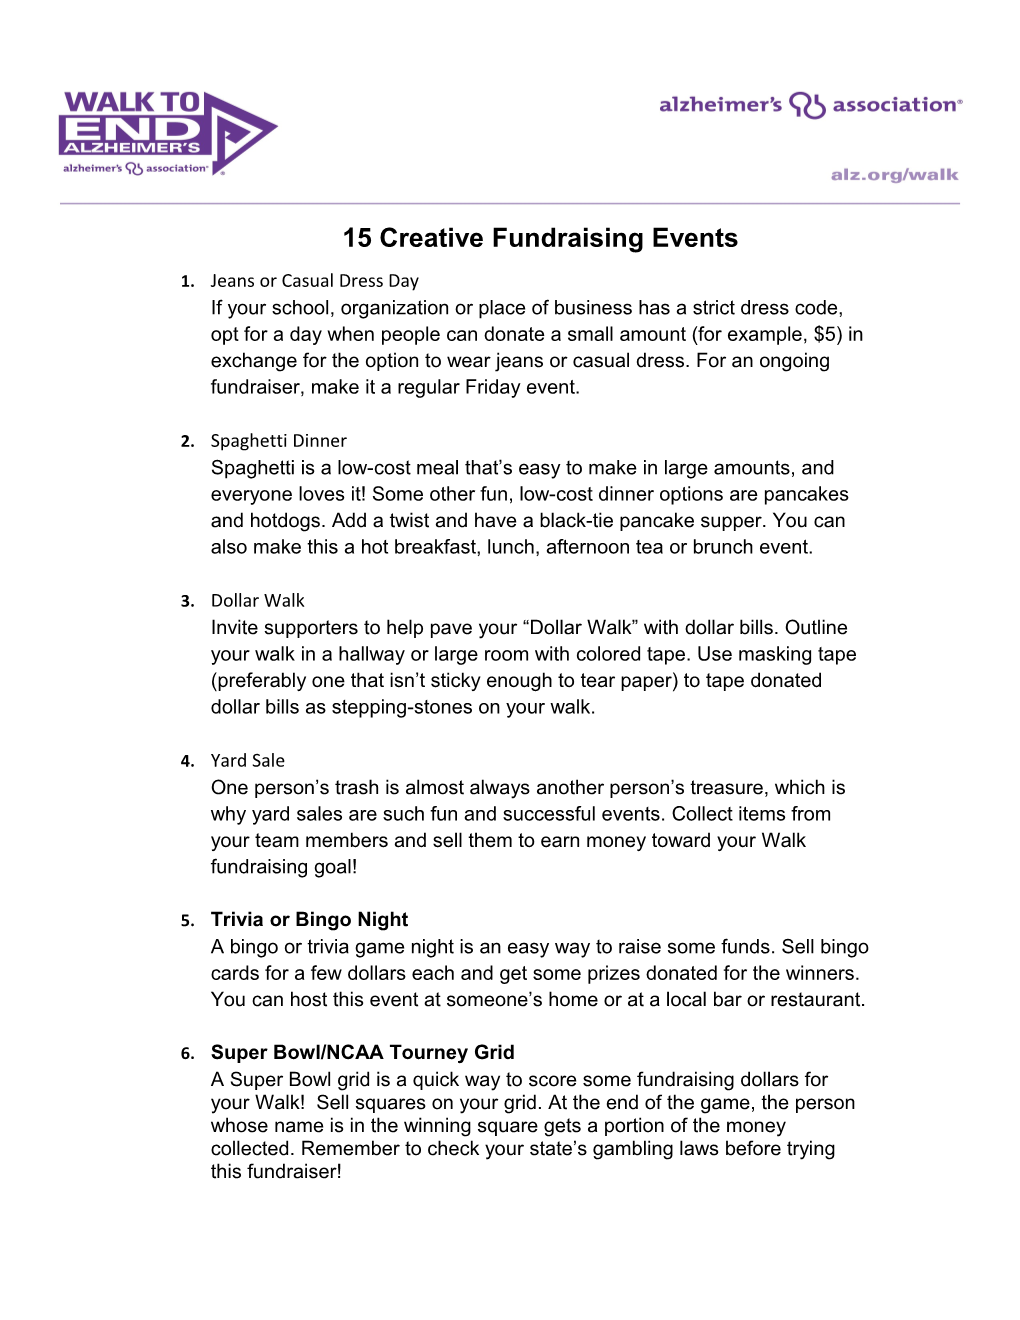 15 Creative Fundraising Events